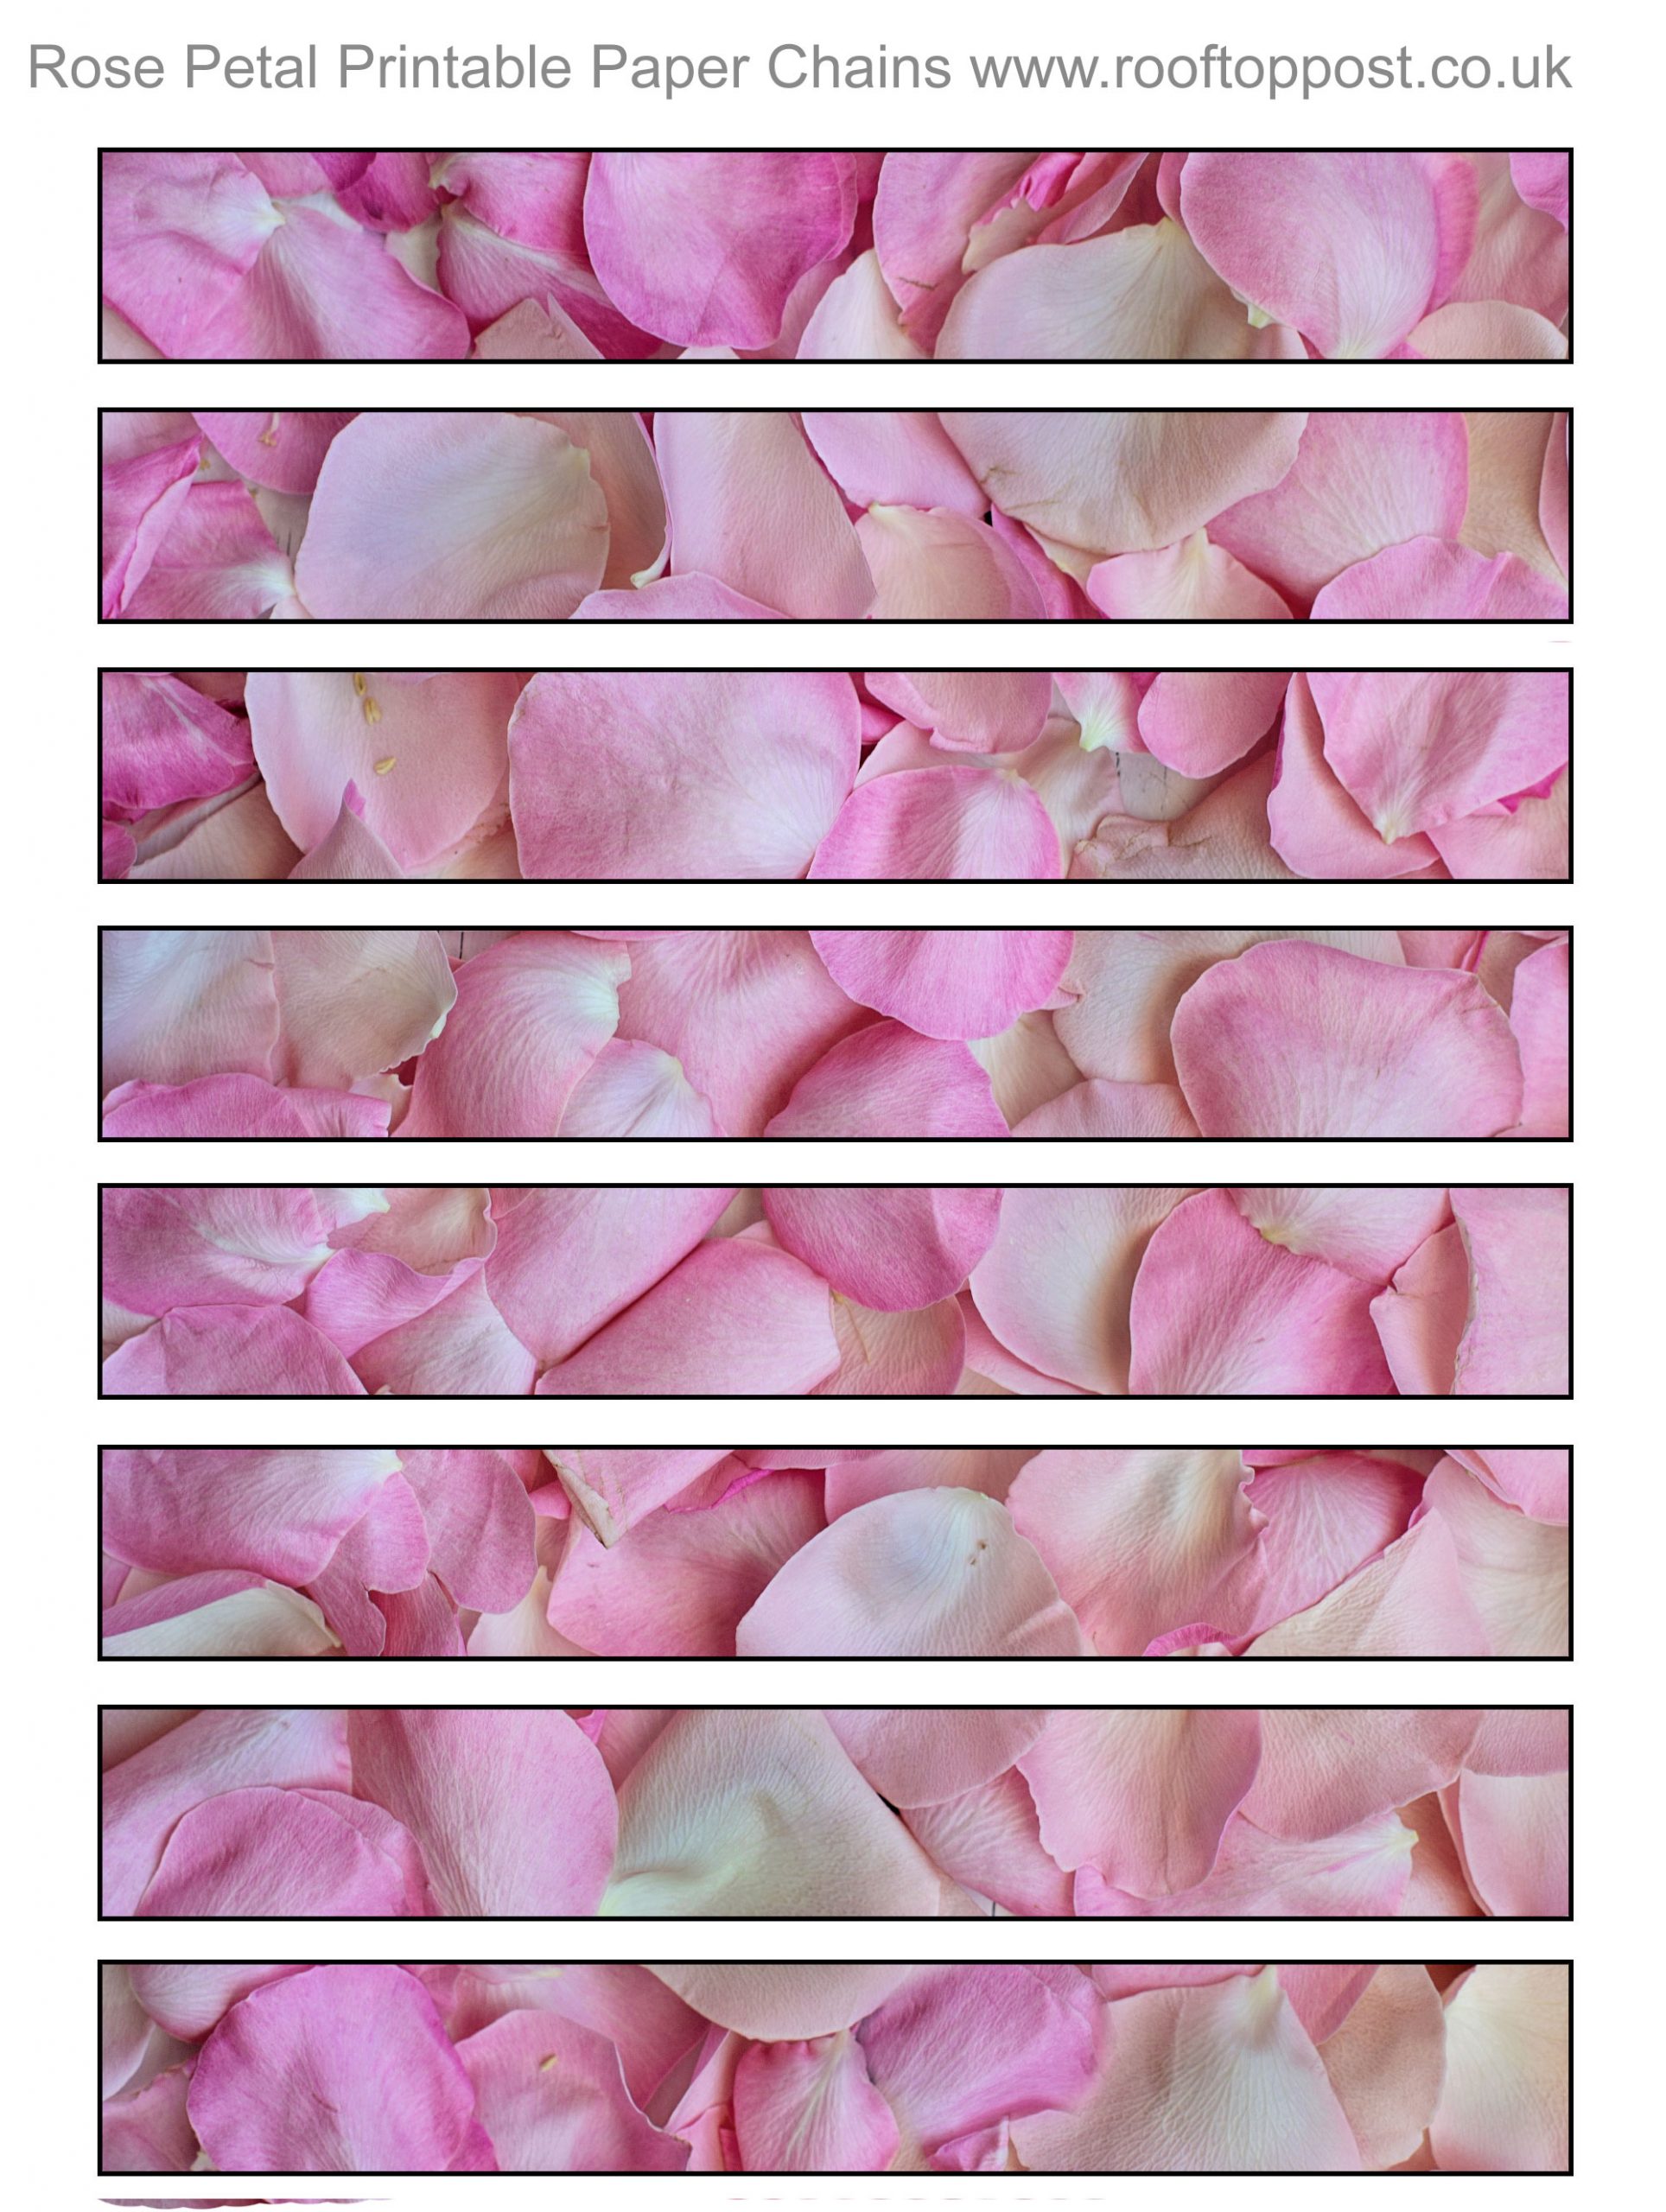 Printable paper chain strips to decorate for spring festivals - these ones depict pink rose petals